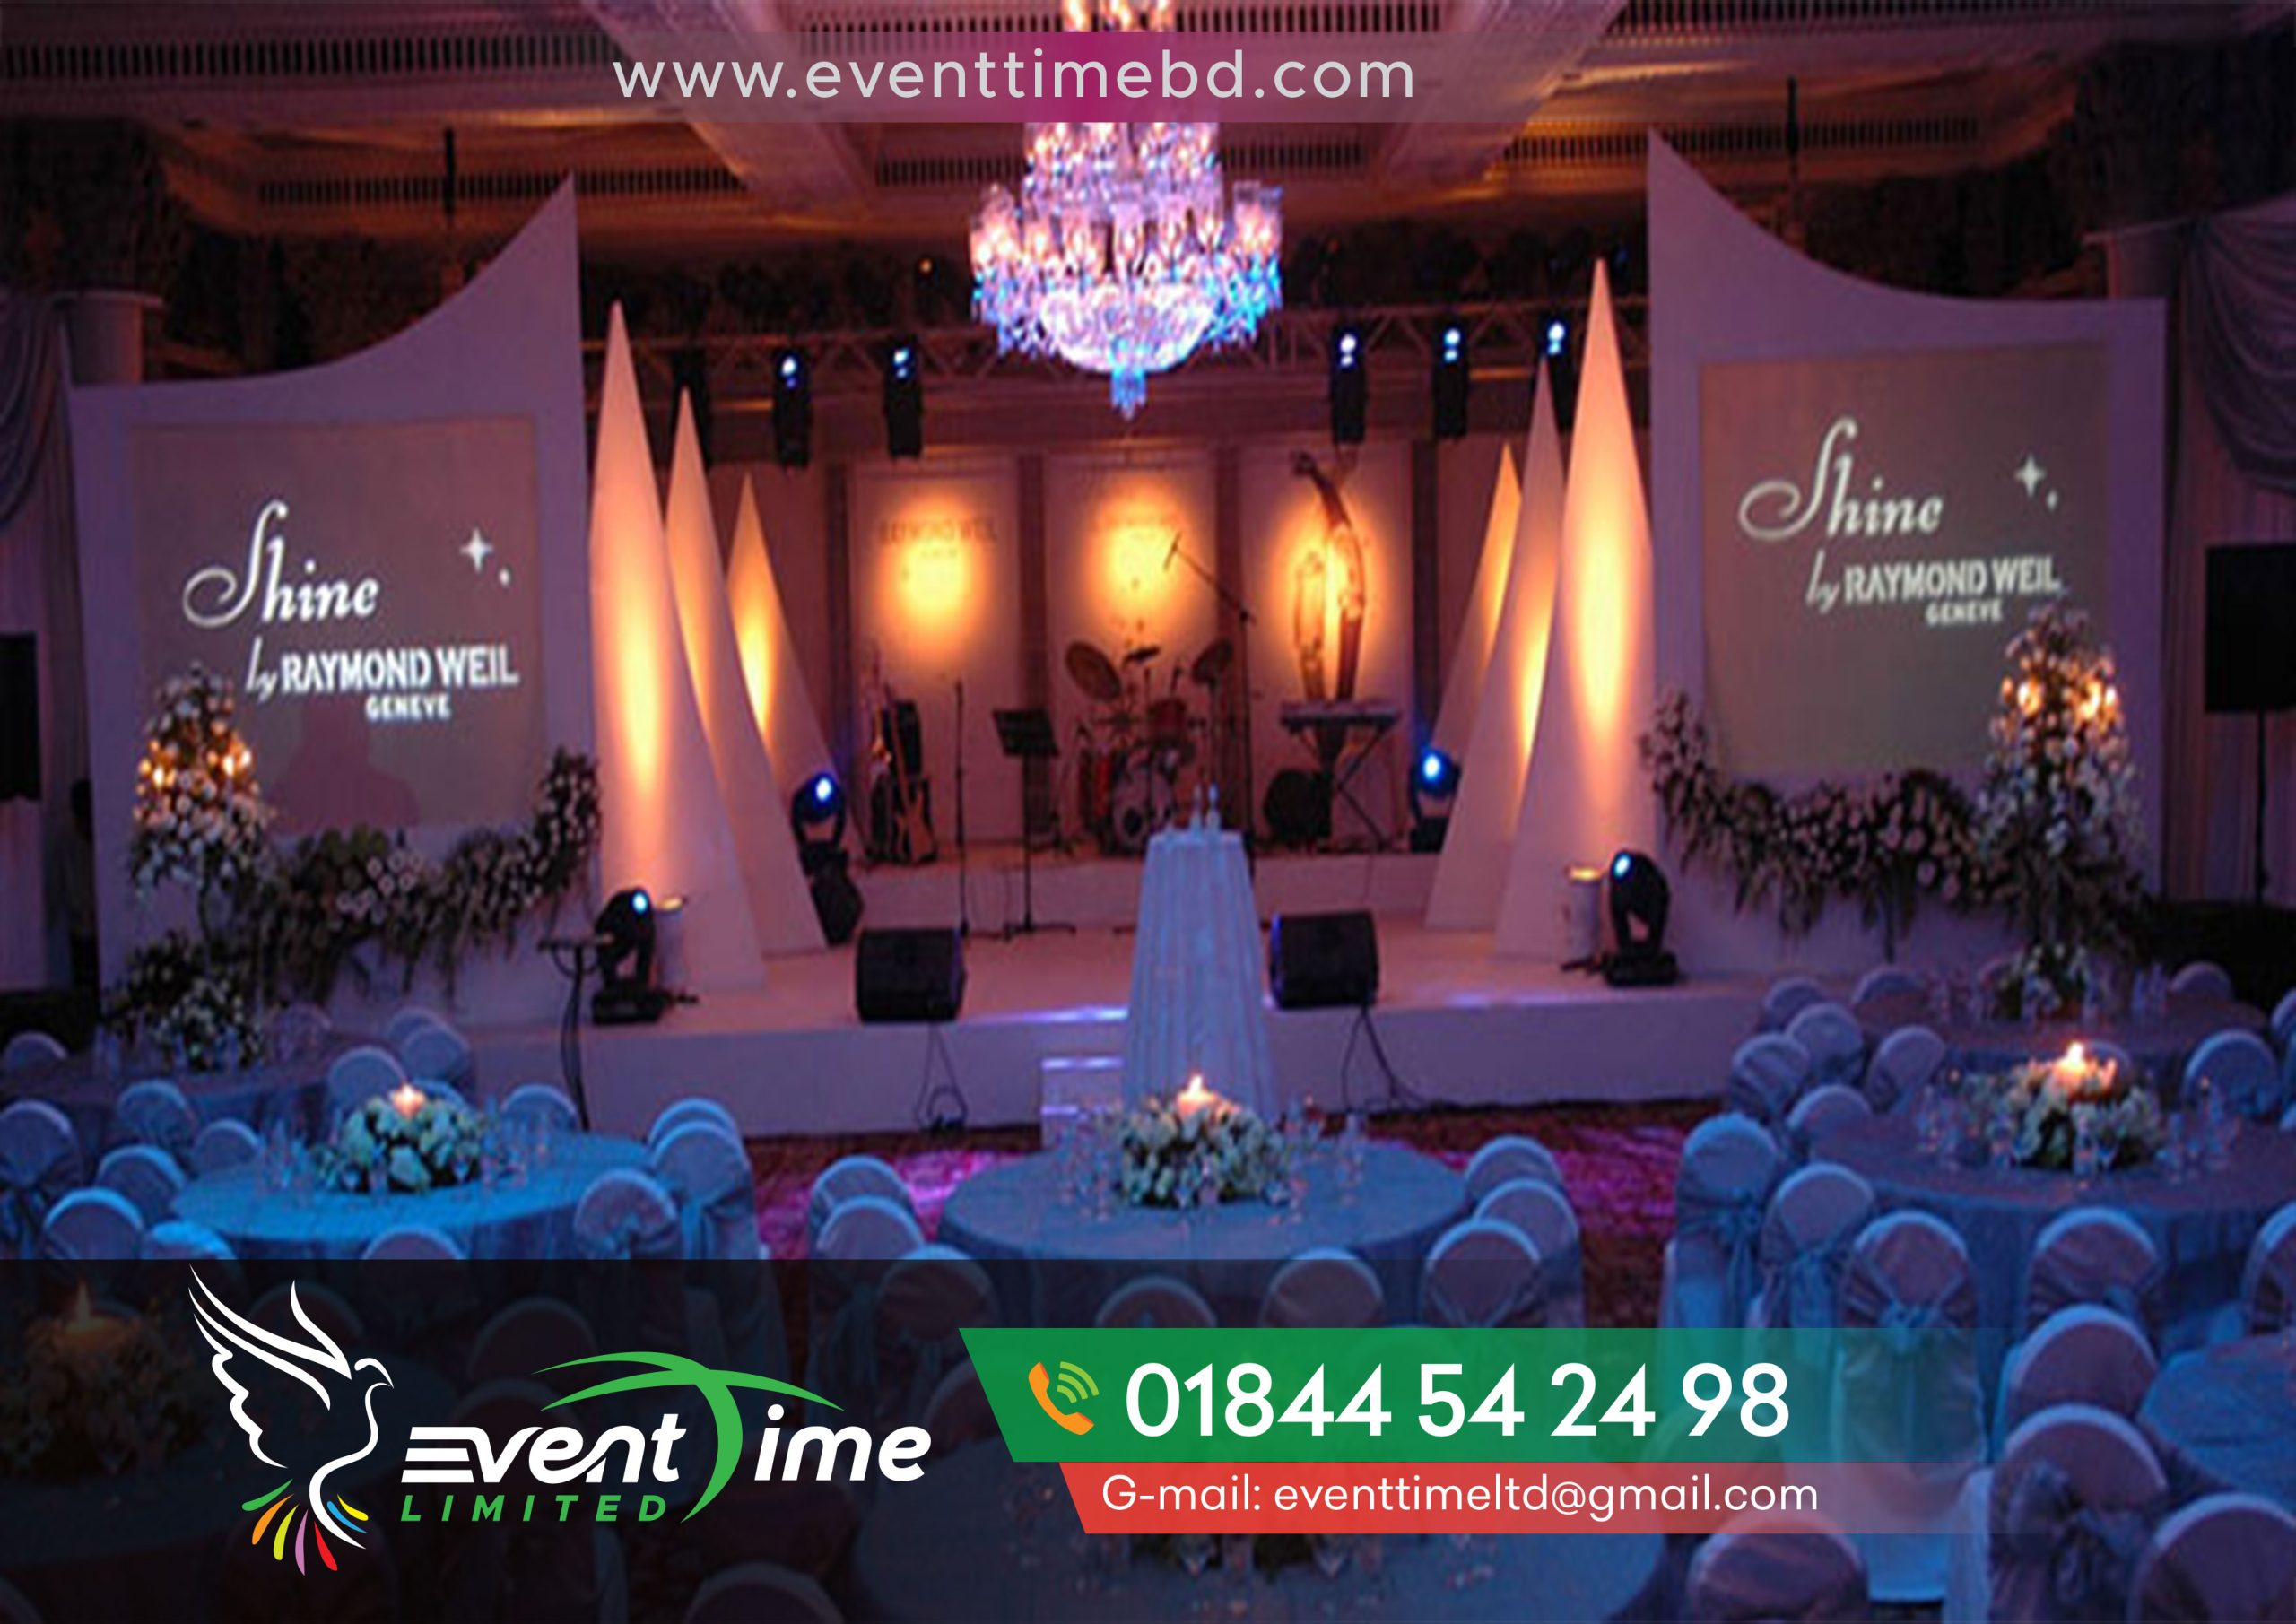 Best event management Companies in Bangladesh. corporate event. corporate bonding. event company. corporate meetings. meeting company. corporate party. corporate team building activities. best team building activities. corporate event planner. corporate event management. top event management companies. team building events. event planning companies. team events. company retreat. corporate retreat. corporate entertainment. company outing. company events. best companies to approach for sponsorship. company party. corporate team building. sponsorship event. corporate activities. corporate event catering. corporate event management companies. team building near me. company team building activities. team building companies. event production companies. the event company. company event. business retreat. event companies near me. corporate christmas party. unusual team building activities. event management companies near me. audio visual companies. corporate event entertainment. team building days. corporate dinner. virtual team building events. scavenger hunt team building. best event management companies. best corporate events. virtual corporate events. team building meeting. corporate event venue. corporate events near me. town hall meeting in company. best virtual team building activities. corporate day. team building outings. fun team events. corporate team building events. corporate days out. unique team building activities. hybrid team building activities. corporate meeting rooms. corporate event space. corporate meeting space. office outing. corporate event planning companies. corporate event companies. team building experiences. team building days out. internal events. top event planning companies. corporate away days. incentive events. corporate event production. corporate holiday party. corporate outing. offsite team building activities. event planning companies near me. corporate party entertainment. company annual dinner. corporate event organisers. fun corporate events. corporate team outing. top event management companies in world. corporate conference. corporate fun activities. office event. drumming team building. corporate event activities. team building retreats. outdoor activities for team building. treasure hunt team building. event decor company. business team building activities. summer team building activities. corporate sports events. corporate event locations. fun company events. outdoor corporate events. quick outdoor team building activities. team building locations. live event production companies. event organization company. corporate meeting planner. corporate offsite. top 50 event planning companies. corporate town hall meetings internal communication. corporate event decor. fun activities for corporate events. team building trips. corporate group activities. company anniversary celebration activities. corporate team events. corporate event services. corporate scavenger hunt. corporate event coordinator. corporate gathering. corporate picnic. company conference. corporate virtual events. corporate retreat packages. team building dinner. corporate breakfast. corporate hospitality events. csr meeting. theme for corporate events. event company website. team building seminar. corporate team activities. team away days. christmas party company. team building retreats near me. corporate team bonding activities. picnic companies near me. corporate sports day. new team building activities. corporate event packages. team building party. corporate venue. corporate meeting spaces near me. famous event management companies. fun company activities. international event management companies. corporate retreat activities. offsite team building. best event planning companies. new year team building activities. corporate events agency. best corporate team building activities. best event company. company picnics. company away days. company retreat activities. top golf team building. corporate event organizer. corporate meetings and events. company team building events. corporate entertainment service. corporate retreat planners. corporate activity days. corporate event spaces near me. best team building companies. company anniversary theme. event organising company. corporate fun days. big event management companies. corporate entertainer. corporate team building exercises. corporate event hall. corporate celebration. event staging companies. fun corporate team building activities. business team building. event entertainment companies. business event catering. event management company website. corporate event planners near me. corporate meeting rooms near me. corporate networking events. top event companies. interesting team building activities. corporate event locations near me. live event companies. team building agency. company luncheon. corporate treasure hunt. meeting planning companies. corporate event planning services. corporate live. summer corporate events. company picnic activities. company days out. fun activities for corporate employees. live production companies. team building activities for corporate employees. virtual event production companies. company event management. top 10 event management companies in world. corporate event management services. the best team building activities. outdoor team building activities for small groups. corporate party activities. company group activities. indoor corporate team building activities. corporate cocktail party. corporate event marketing. top corporate event planning companies. banquet halls for corporate events. corporate 5k. main event corporate office. the team building company. fun team building events. outdoor team building events. corporate team building companies. corporate meeting venue. virtual team building companies. indoor team building events. best team building events. cool team building activities. murder mystery corporate event. christmas corporate events. corporate event planning packages prices. corporate dinner activities. company outing trip. corporate social events. conference management companies. virtual company events. scavenger hunt company. amazing race corporate team building. top event production companies. corporate party venue. outdoor team building activities near me. team building companies near me. corporate meeting management. laser tag team building. evening entertainment for corporate events. sports hospitality companies. corporate summer party. special corporate events. hybrid team building. indoor corporate events. escape team building. company year end party. destination management company. event management. strategic meetings management. event planning. event management companies. event management business. wedding event management. event designing. event organisers. event company. event management website. event coordination. decoration event management. event management near me. event management services. wedding management. meetings management. marriage event management. birthday event management. event management business plan. event planner near me. corporate event management. event management platform. managers meeting. corporate event planners. event management agency. top event management companies. best event management. event planning 101. creative event management. event planning companies. management events. event agency. certified event planner. southern event management. corporate event management companies. event organizer company. sports event management. us event management. event management plan. event planning website. event planning and management. event management companies near me. perfect event. event management itil. event operations. birthday event management near me. conference management. virtual event management. rims conference. best event management companies. event consultant. event company near me. pmi conference. successful event planning. cvent event management. birthday event planners. 5cs of event management. sustainable event management. corporate event planning companies. exhibition management. famous event planners. special events management. event management team. birthday party event management. management fest. top event planning companies. event management sites. festival management. birthday event organisers. conference event management. hospitality event. corporate events companies. event planning companies near me. corporate event organisers. meeting room management. pmi conference 2023. party management. it event management. event planning agency. top event management companies in world. event organizer website. fair management. event management group. conference room management. sports event management companies. conference registration platforms. birthday decoration event management. marriage event management near me. top 50 event planning companies. catering and event planning. a to z event management. convention management. concert event management. event arrangement. hfma annual conference 2023. birthday decoration event management near me. wedding management companies. event security management. virtual event agency. hfma conference 2023. bliss event management. topline event management. concert management. 5c of event management. catering and event management. wedding event planner near me. event planning platform. best event management platforms. event company website. advanced event management. special event coordinator. sustainable event planning. registration platforms. hybrid event management. event management portfolio. sports event coordinator. event management marketing. sports event planner. need of event management. event registration management. party event management. event organisers for birthday party. destination management services. sports and event management. famous event management companies. exhibition event management. event management for birthday party near me. best event planning companies. shadi event management. music event management. event planning packages. manage my wedding. best event company. hotel event management. aura event management. event organizer business plan. meeting and event planning. pre event planning. marriage event management cost. music event management companies. corporate event organizer. corporate event agency. pr and event management. festival event management. sports event organisers. integrated events management. event booking platform. costing in event management. event organising company. activities in event management. big event management companies. digital event management. celebrity event management. sapphire event management. green event management. end to end event management. event planning organizations. event operations coordinator. event management company website. sales and events coordinator. event in itil. event management services packages. corporate event planners near me. creative event organizers. top event companies. event management firms. birthday celebration event management. event planning sites. dreamz event management. strategic event management. event management organisation. garnish event management. festival event management plan. 360 event management. celebrity event planners. professional event management. virtual event management companies. conference and event organiser. event management slideshare. event management after 12th. event planning team. celebration event management. conference and event management. itil event. event management and marketing. public relations in event management. company event management. event management tasks. top 10 event management companies in world. corporate event management services. event management saas. event planning portfolio. best event planner near me. successful event management. sport event organizer. business plan for event management company. concert management companies. event management packages. top destination management companies. convention and event management. risk in event management. hospitality in event management. luxury event management. wedding event management near me. event management and catering services. azure event management. strategic event planning. party event organisers. top corporate event planning companies. event management organization. odoo event management. unique event management. shadow event management. birthday party decorations event organizers. catering event management. encanta event management. rims conference 2023. event coordinator near me. management fest events. event marketing near me. gojo event management. event traffic management. global exhibit management. conference management companies. apa itu event management. pre event activities in event management. tutons event management company. top event production companies. corporate meeting management. pra destination management. facilities management conference. basileia events management. product launch event management. evergreen event management. crowd management in event management. roadshow management. csc crowd management. conference planning companies. event management companies. epson event manager. event management. epson event manager software. event management company. event manager. event management software. events management. events manager. event management jobs. event manager jobs. event manager salary. security information and event management. facebook events manager. manage events. event management system. events management companies. events manager jobs. corporate event management. event manager job description. event manager software. event management degree. event management platform. event management services. event management softwares. event manager resume. events management software. best event management software. companies of event management. epson software event manager. event management certification. event management solutions. event management tools. event managment. event managment software. event marketing manager. event sales manager. facebook event manager. southern event management. us event management. corporate event management companies. epson event manager download. epson event manager software et-3760. event management app. event manager job. events management jobs. virtual event management. what is event management. best event management companies. epson event manager software wf-2850.